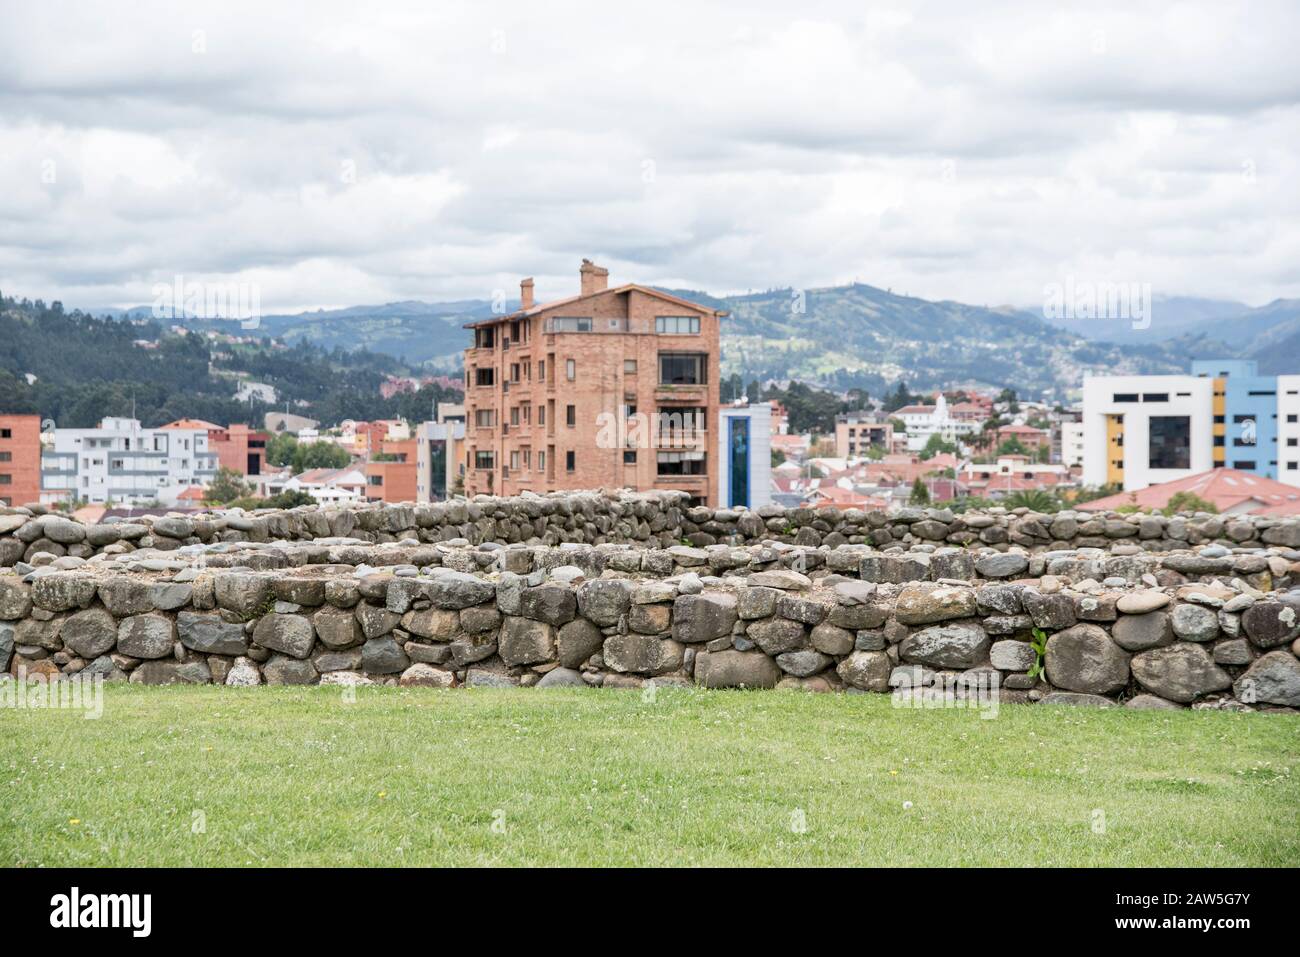 The modern city of Cuenca provides a backdrop to the Cañari-Incan ruins found at the Pumapungo Outdoor Archeology Museum. Stock Photo